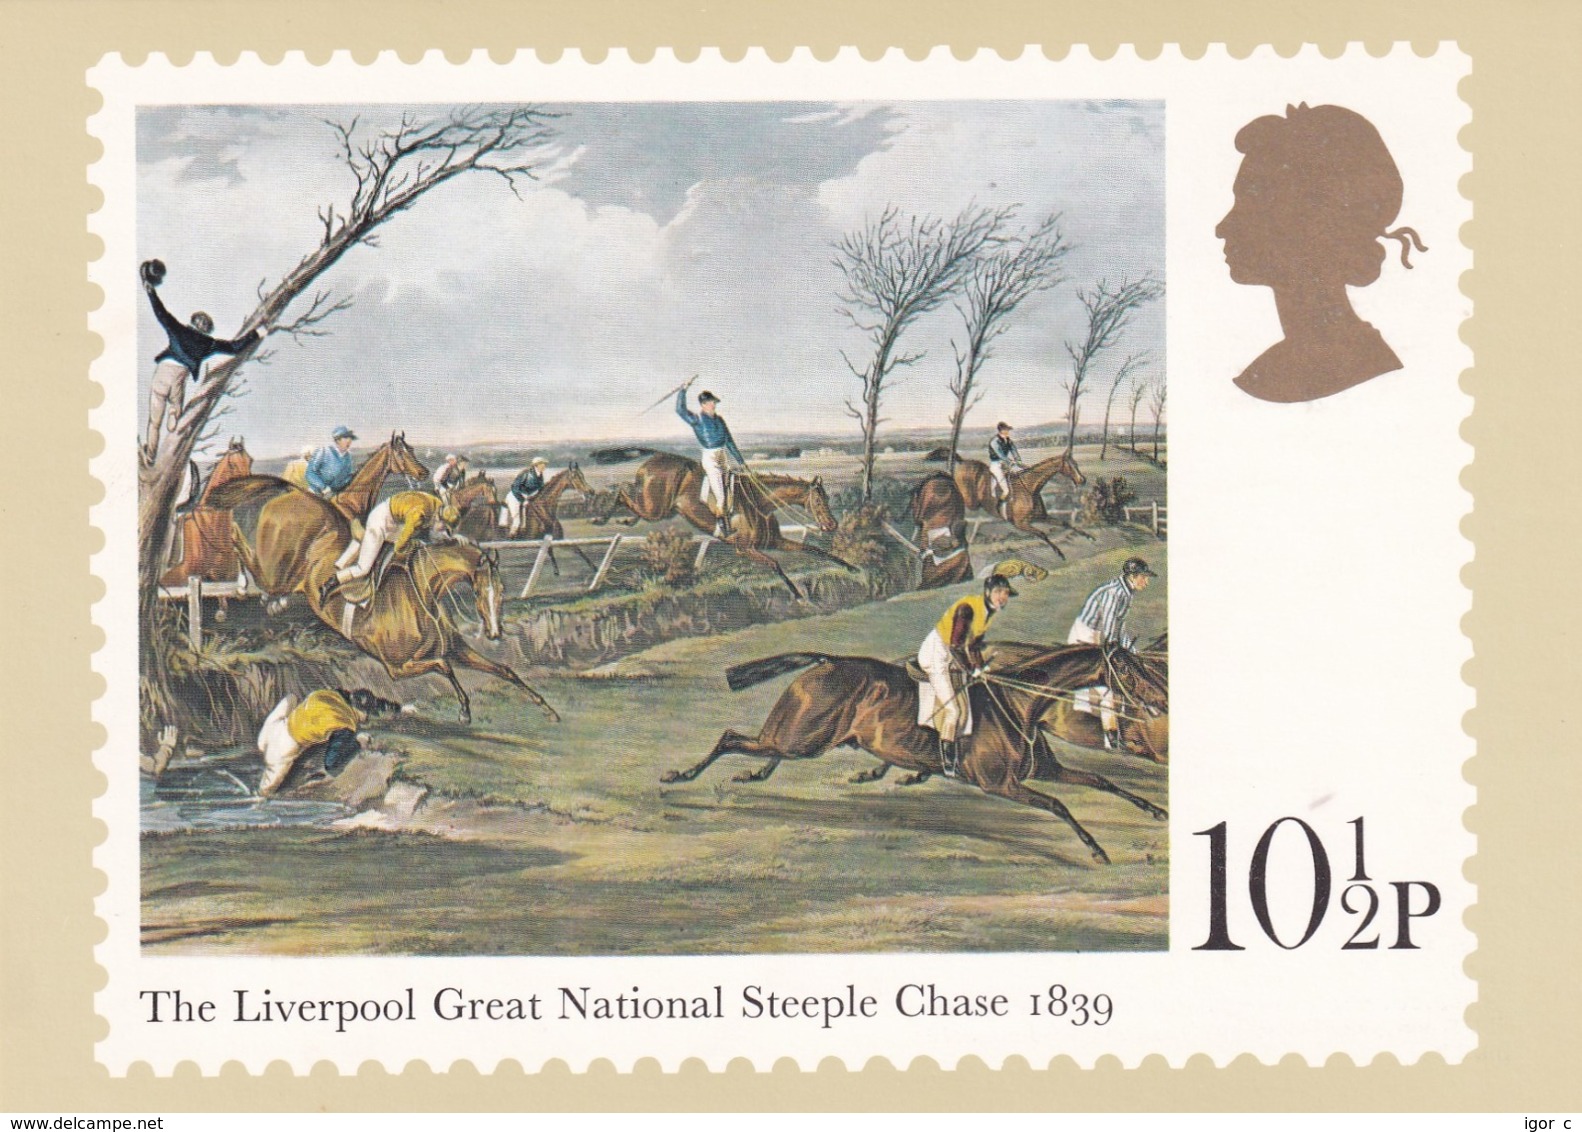 United Kingdom 1979 Card: Horse Racing Equestrian; Pferd; Cheval; The Liverpool Great National Steeple Chase 1839 - Reitsport